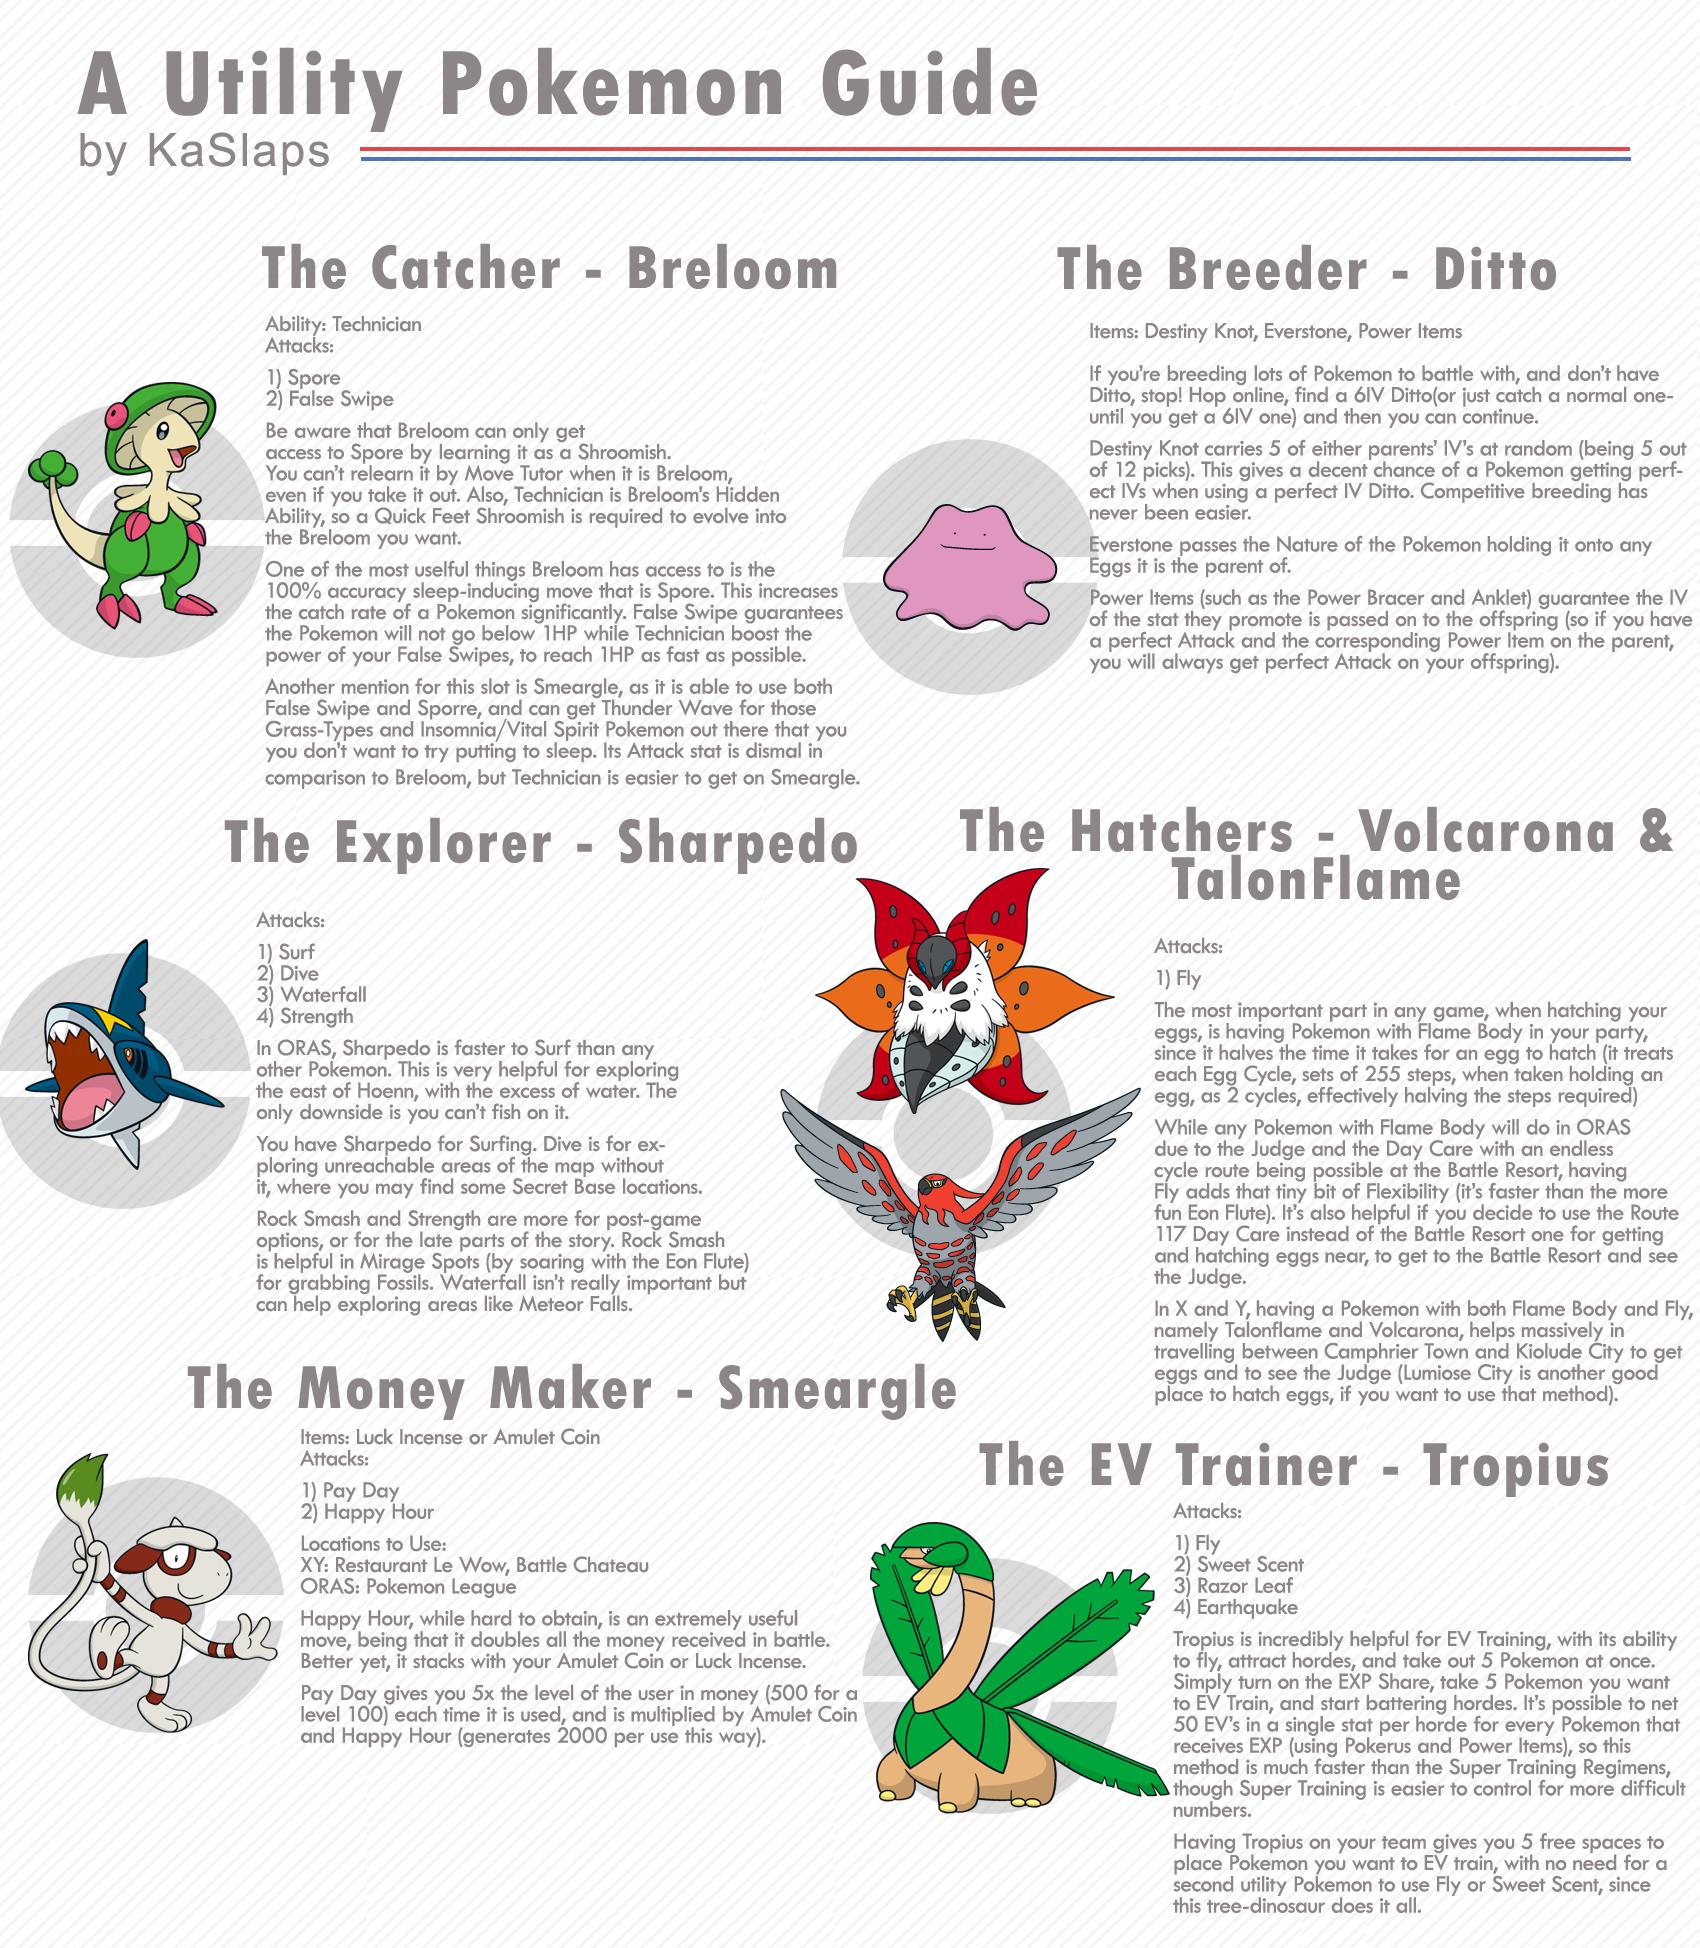 Seven Of The Most Useful Pokémon In Omega Ruby And Alpha Sapphire